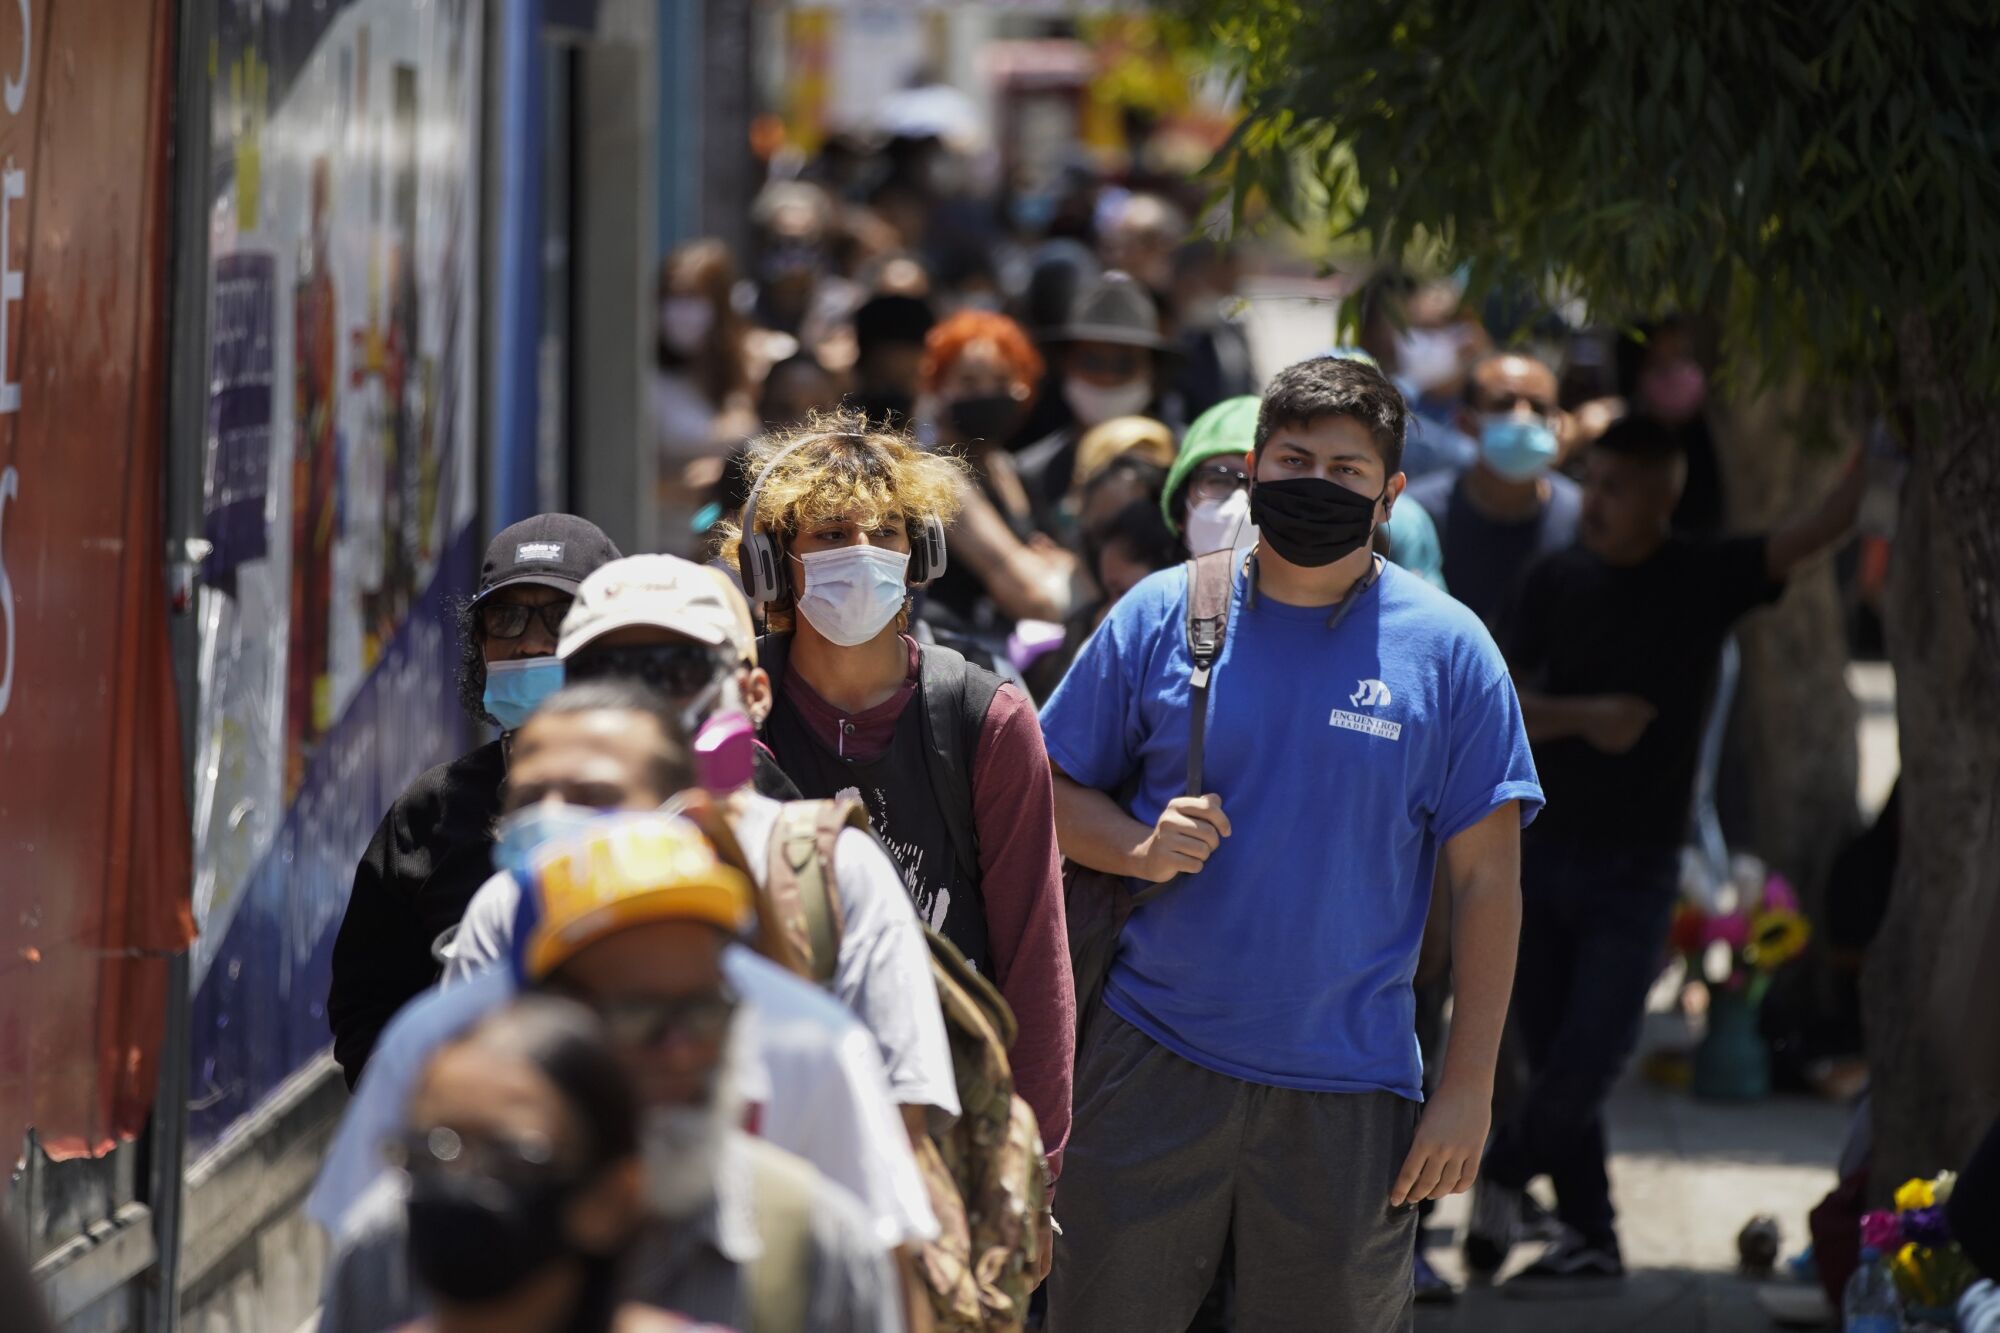 Mask-wearing people wait in a long line outside at the San Ysidro Port of Entry to cross from Tijuana